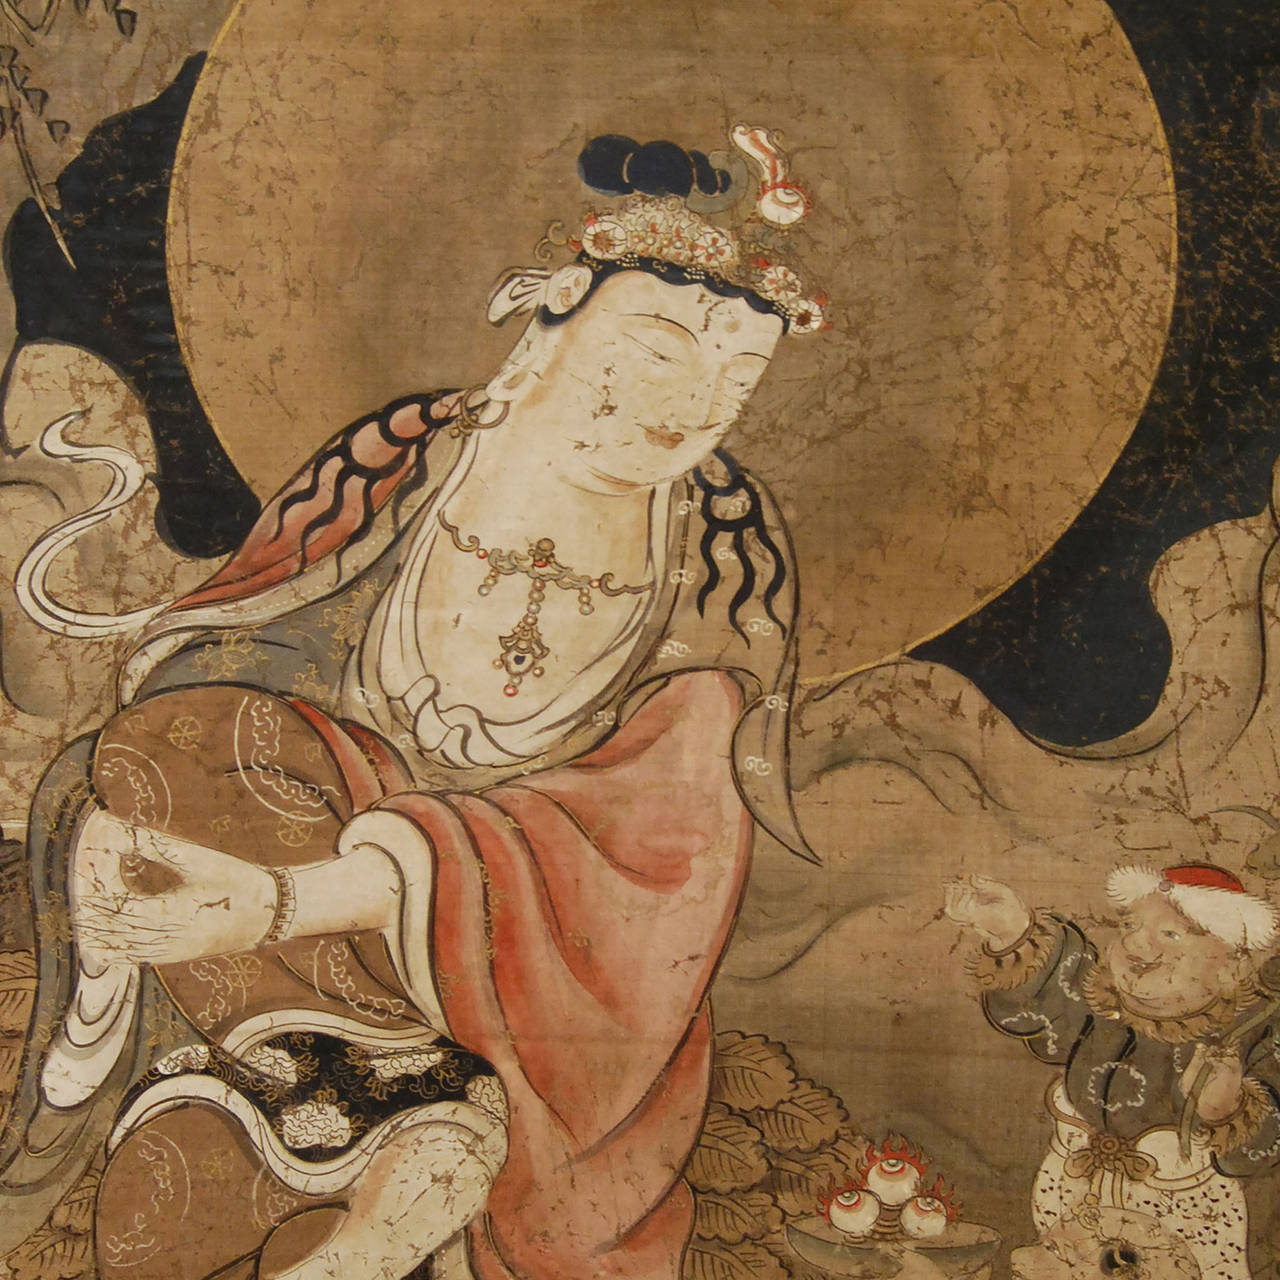 18th Century Japanese Buddhist Scroll Painting of a full moon Guanyin with children attendants in a celestial setting. Mounted with gilt copper.